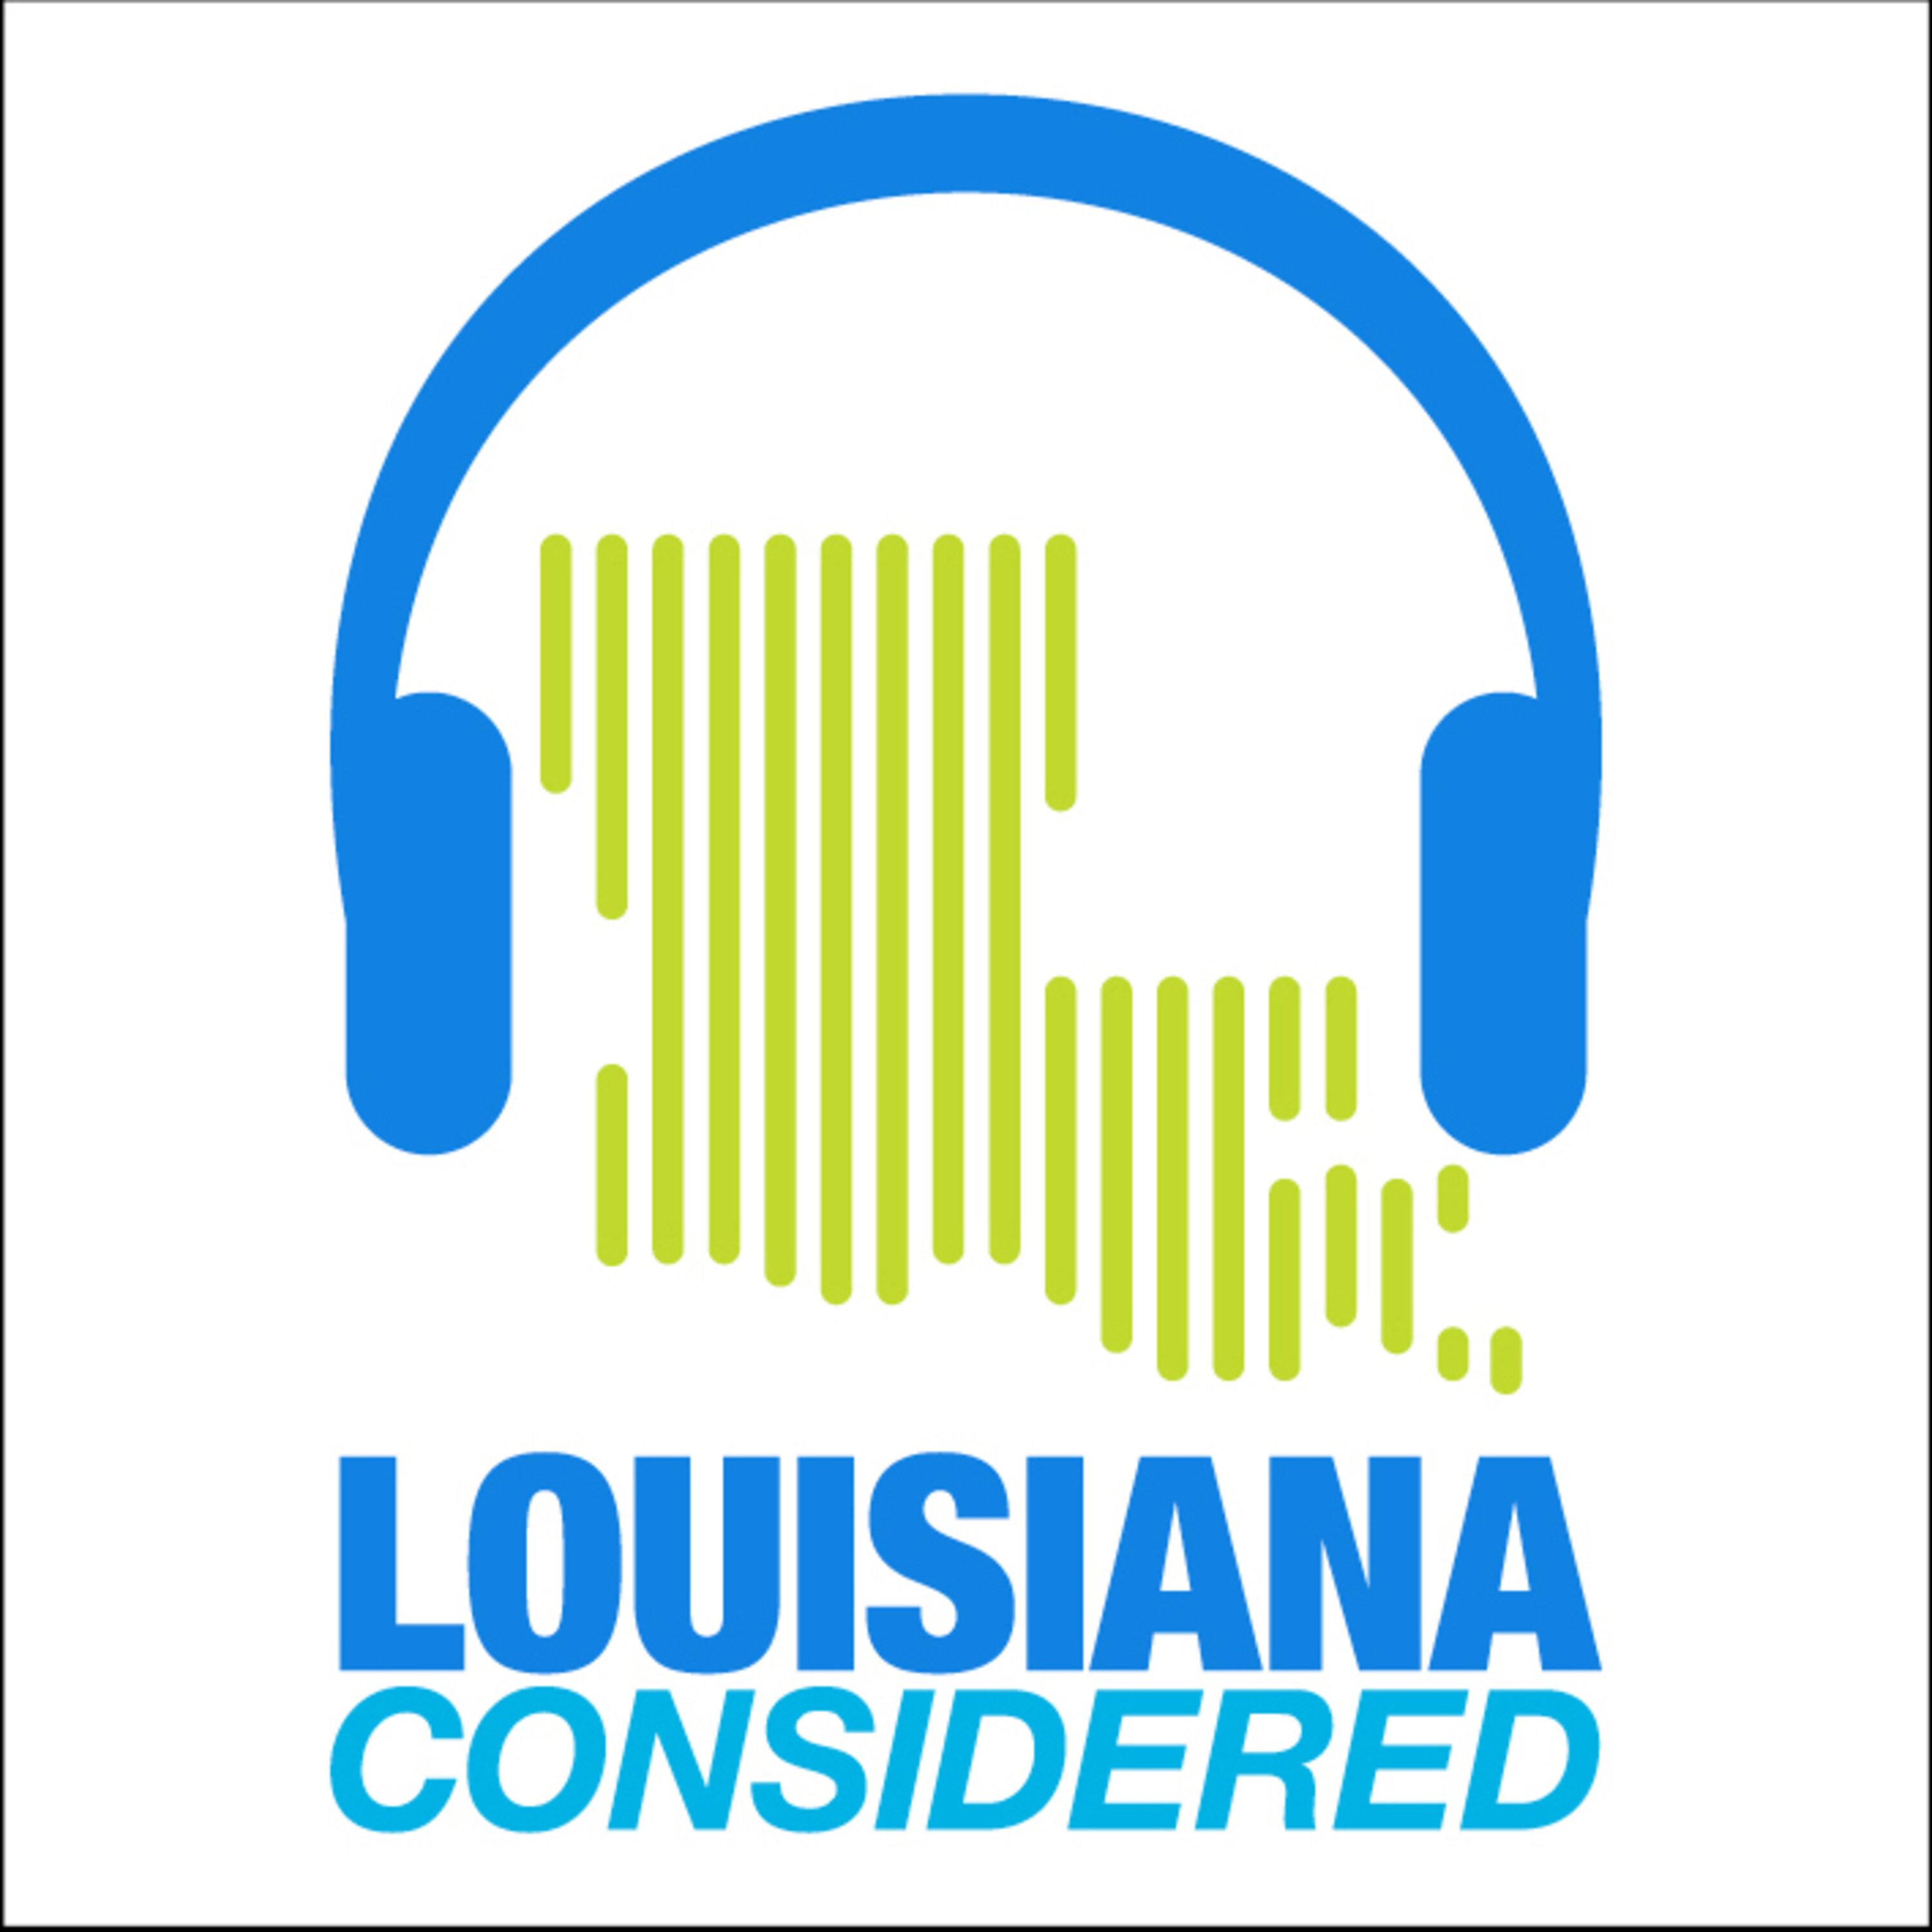 Thumbnail for "Louisiana Considered: How a Louisiana billionaire avoided paying income taxes for over a decade".